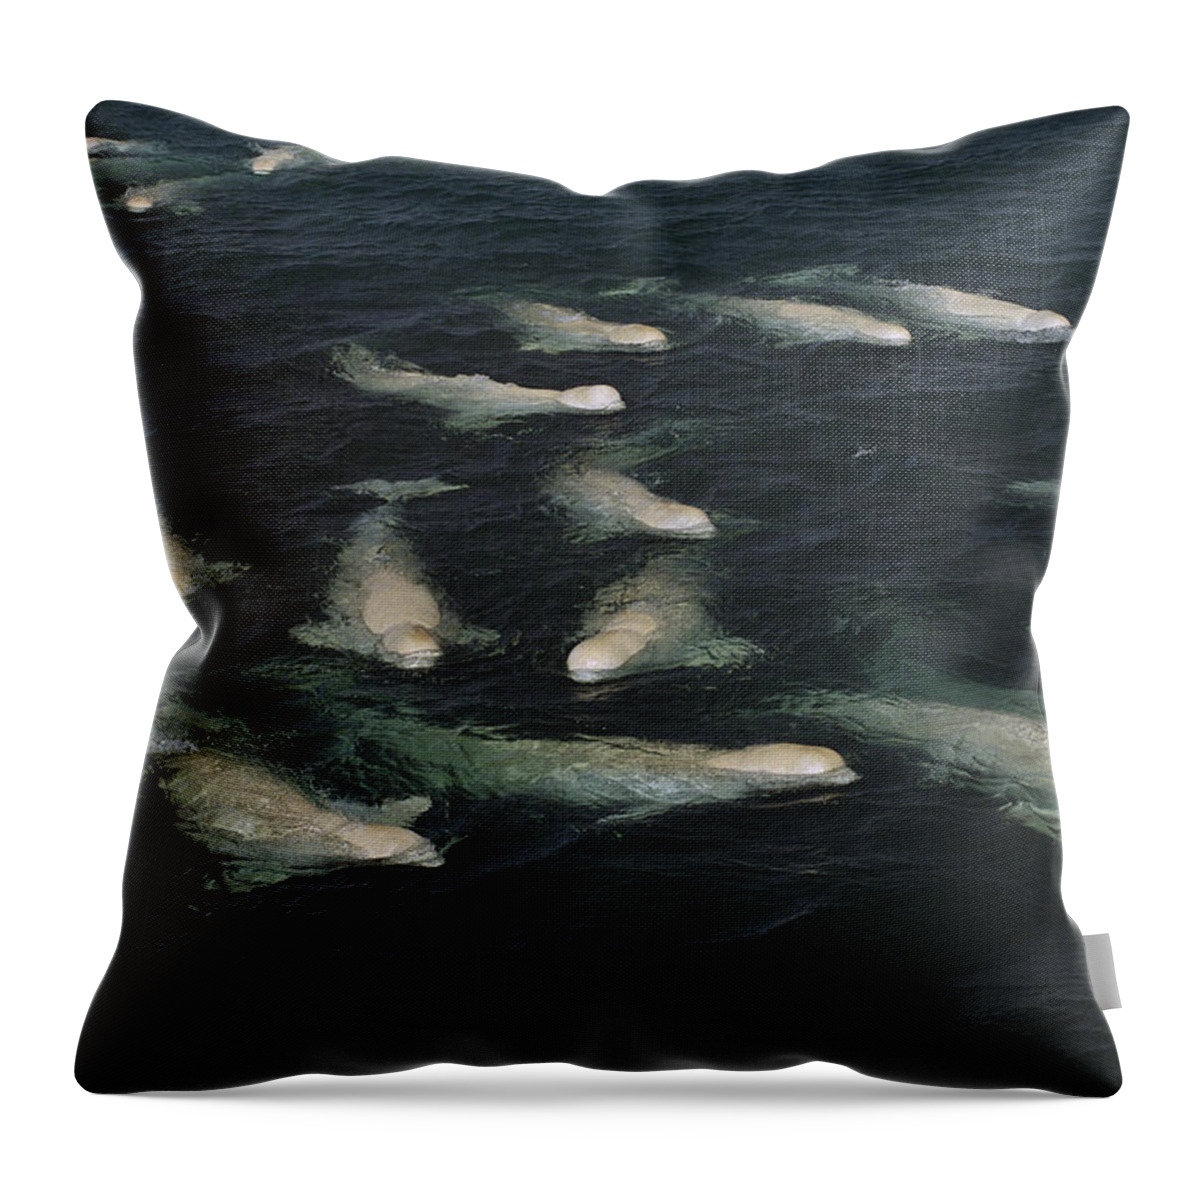 Feb0514 Throw Pillow featuring the photograph Belugas Molting In Freshwater by Flip Nicklin